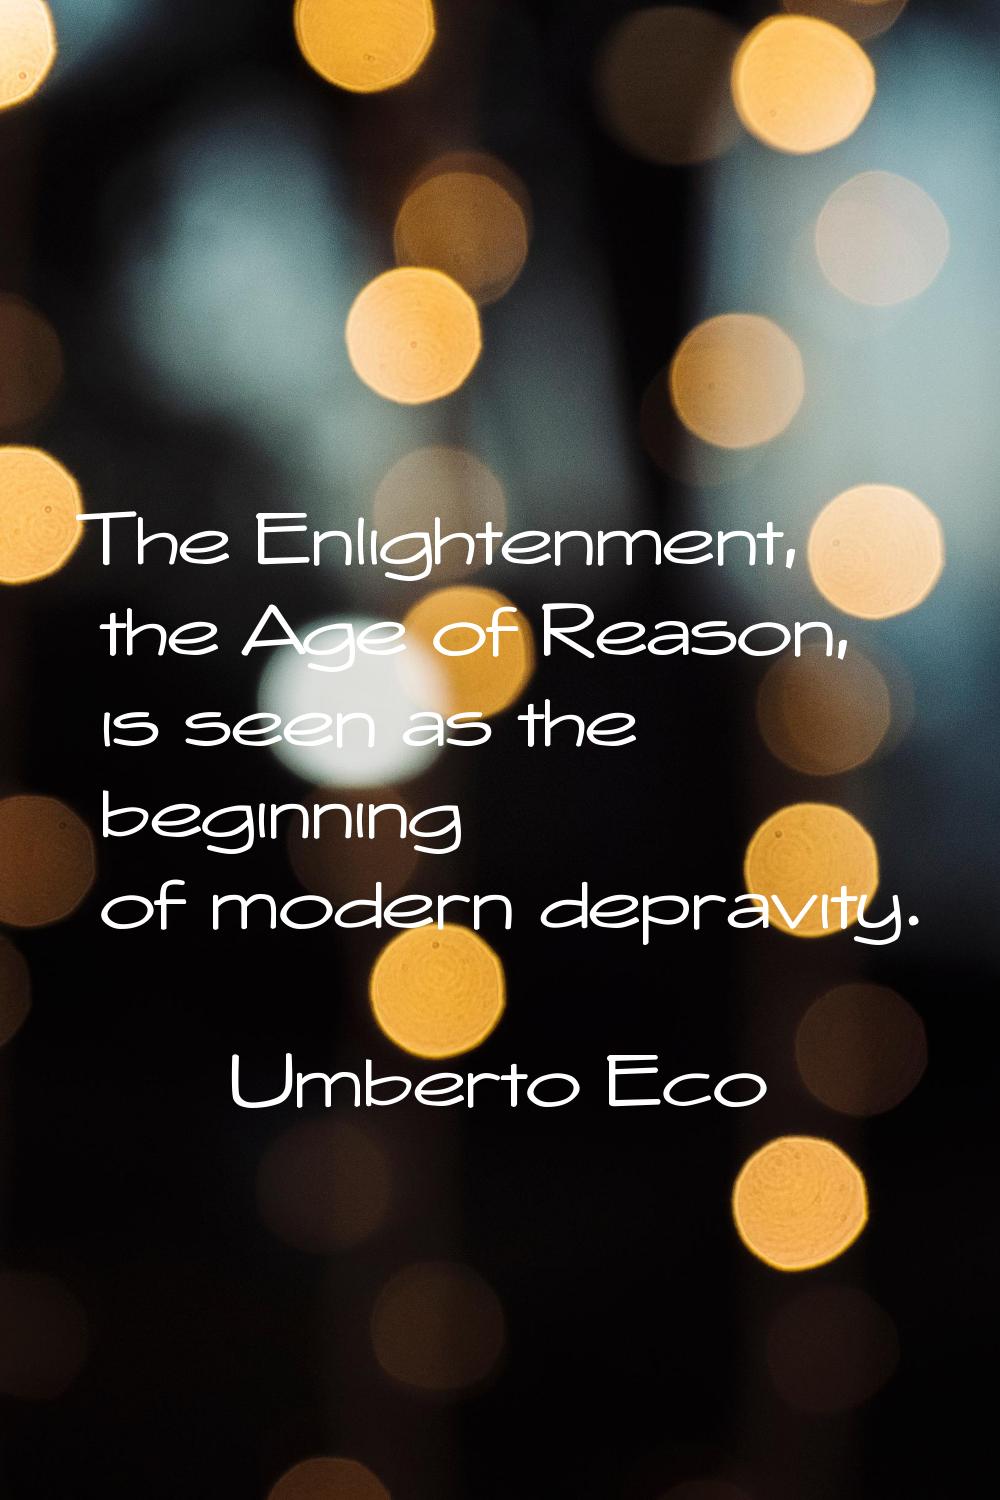 The Enlightenment, the Age of Reason, is seen as the beginning of modern depravity.